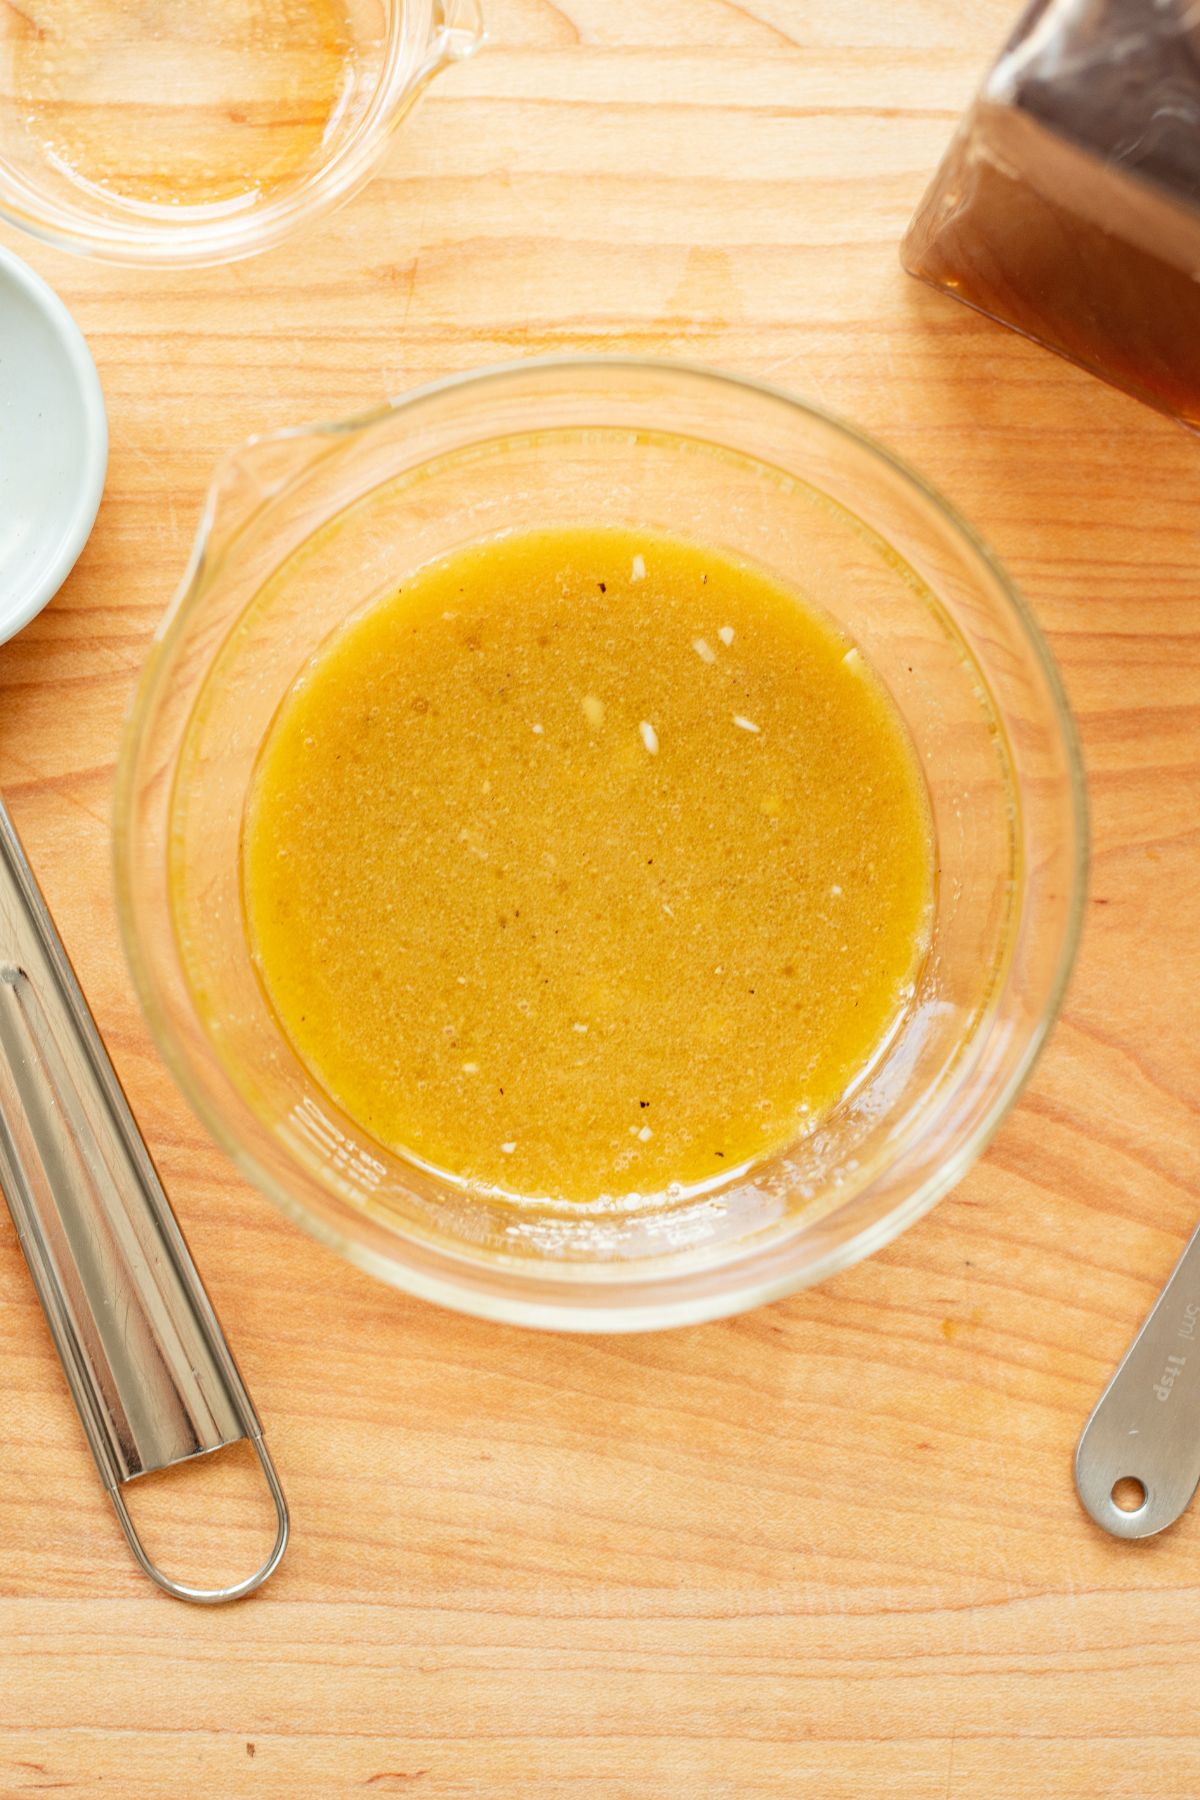 Basic vinaigrette made in a small glass dish.